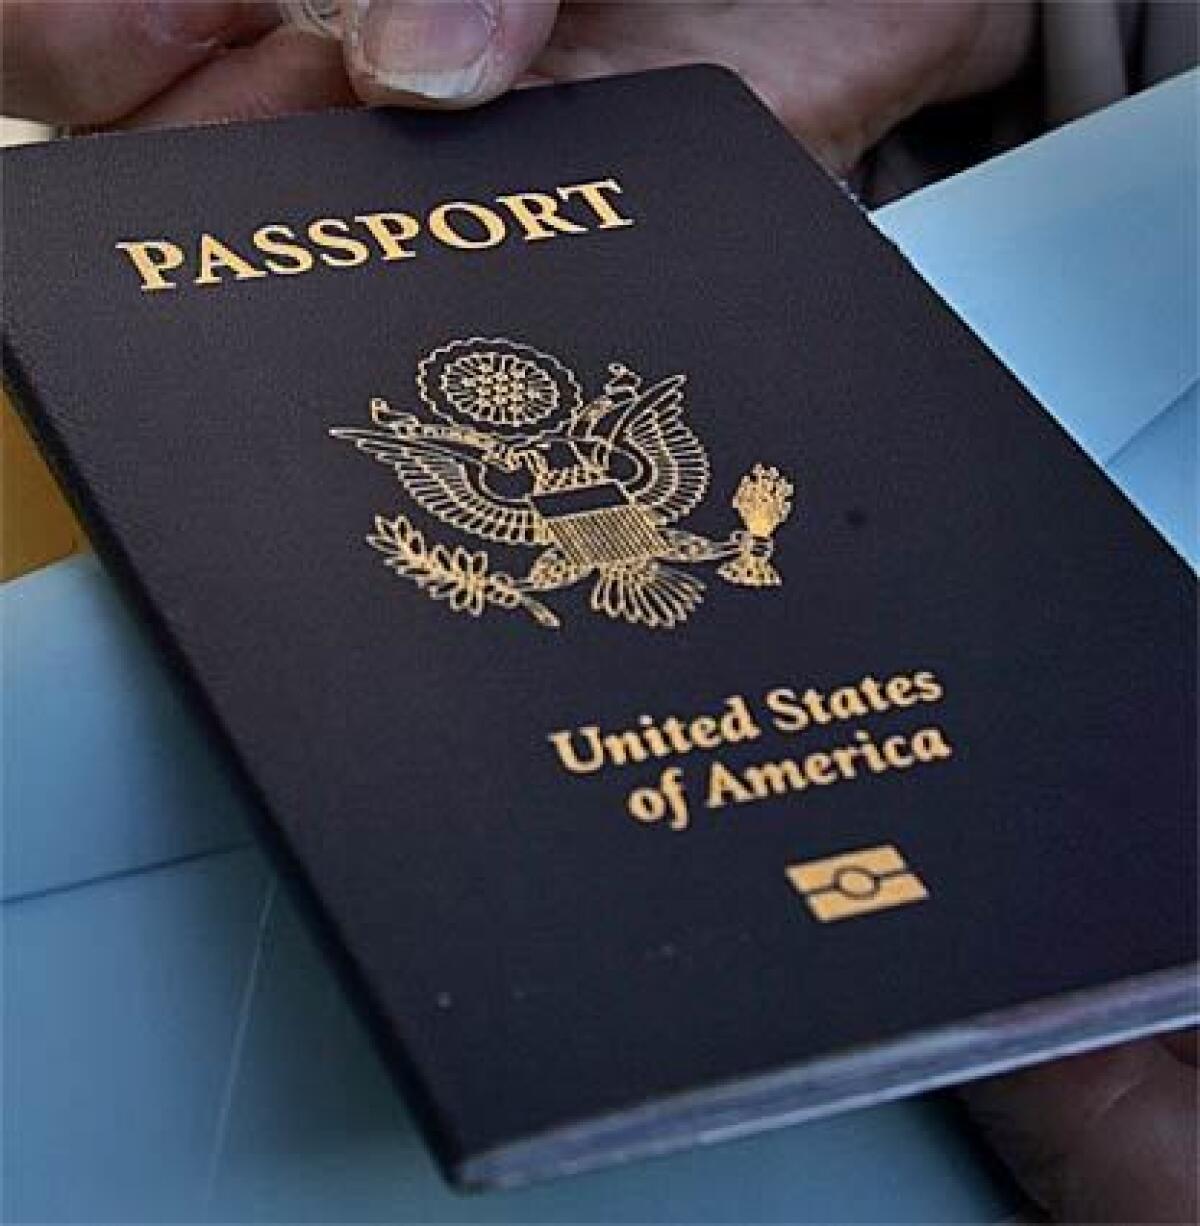 Passport services are being temporarily suspended because of the pandemic.